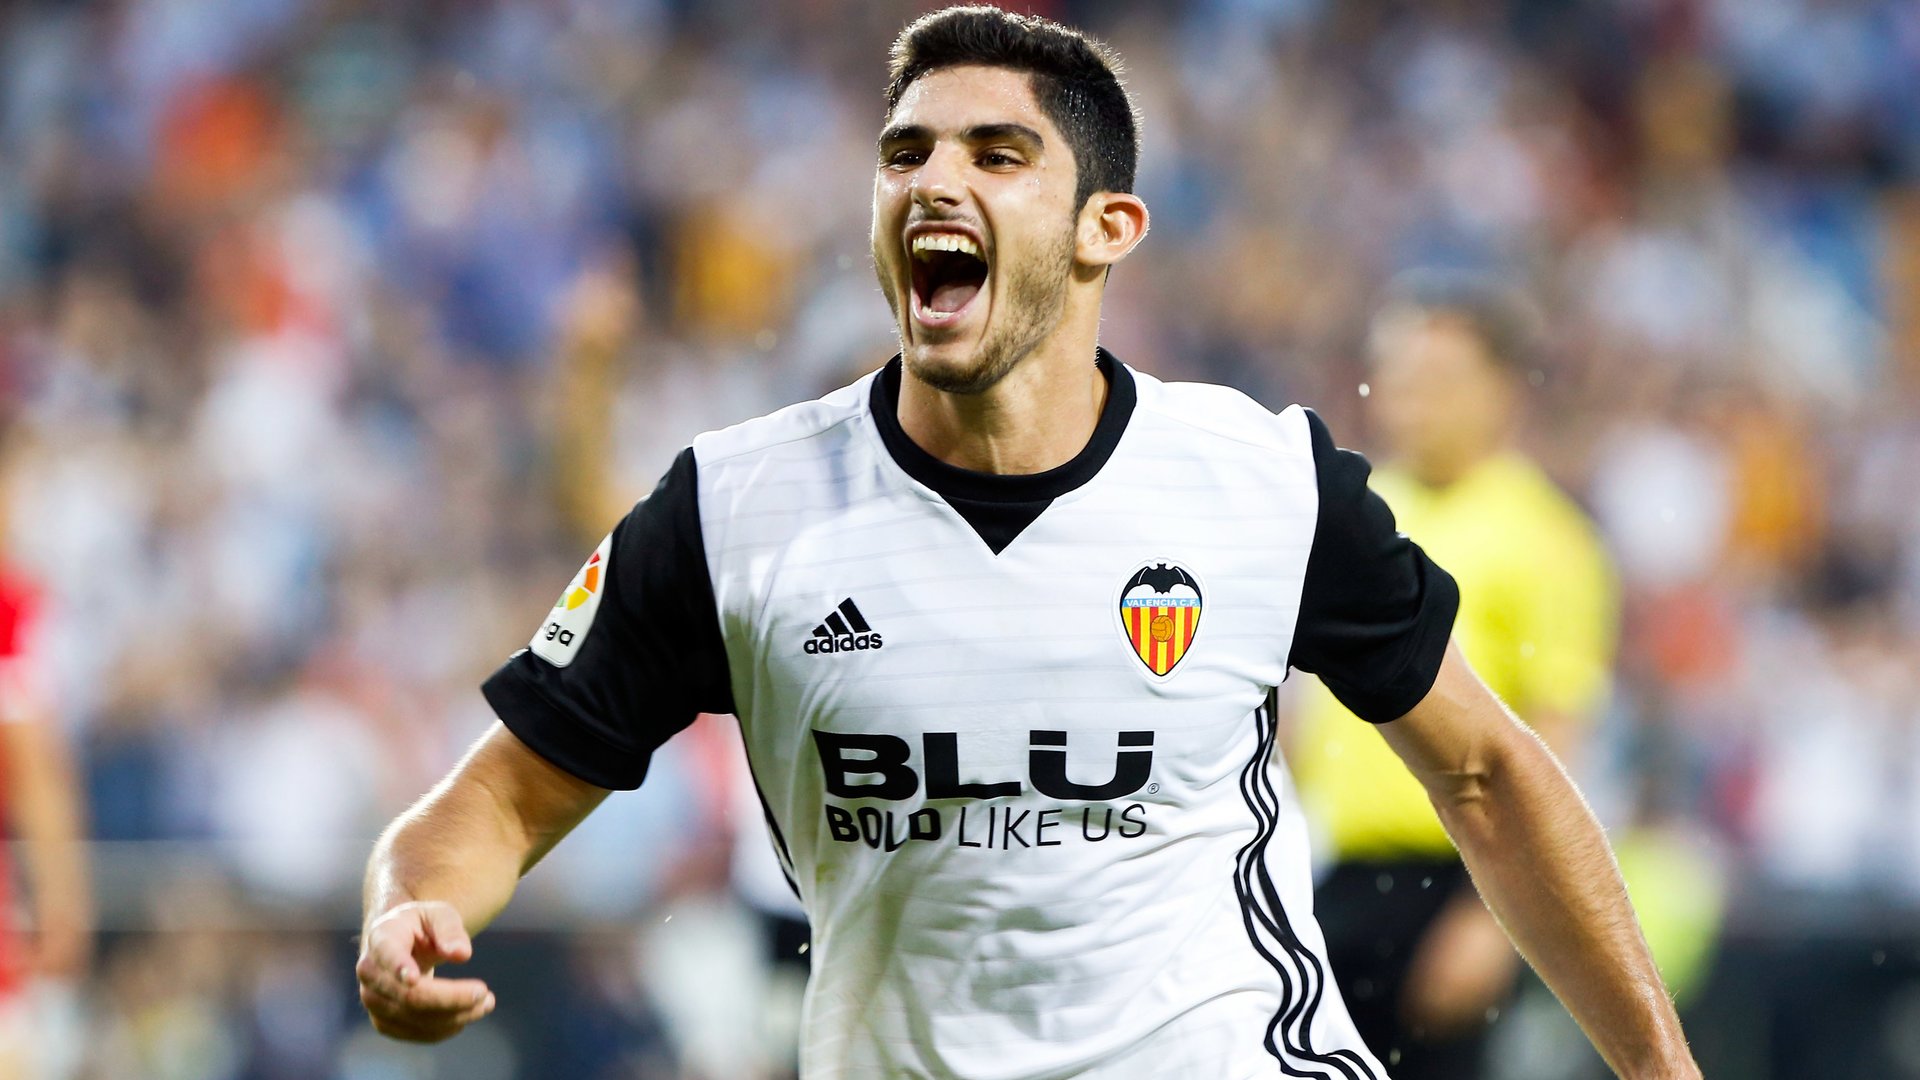 goncalo guedes - photo #4